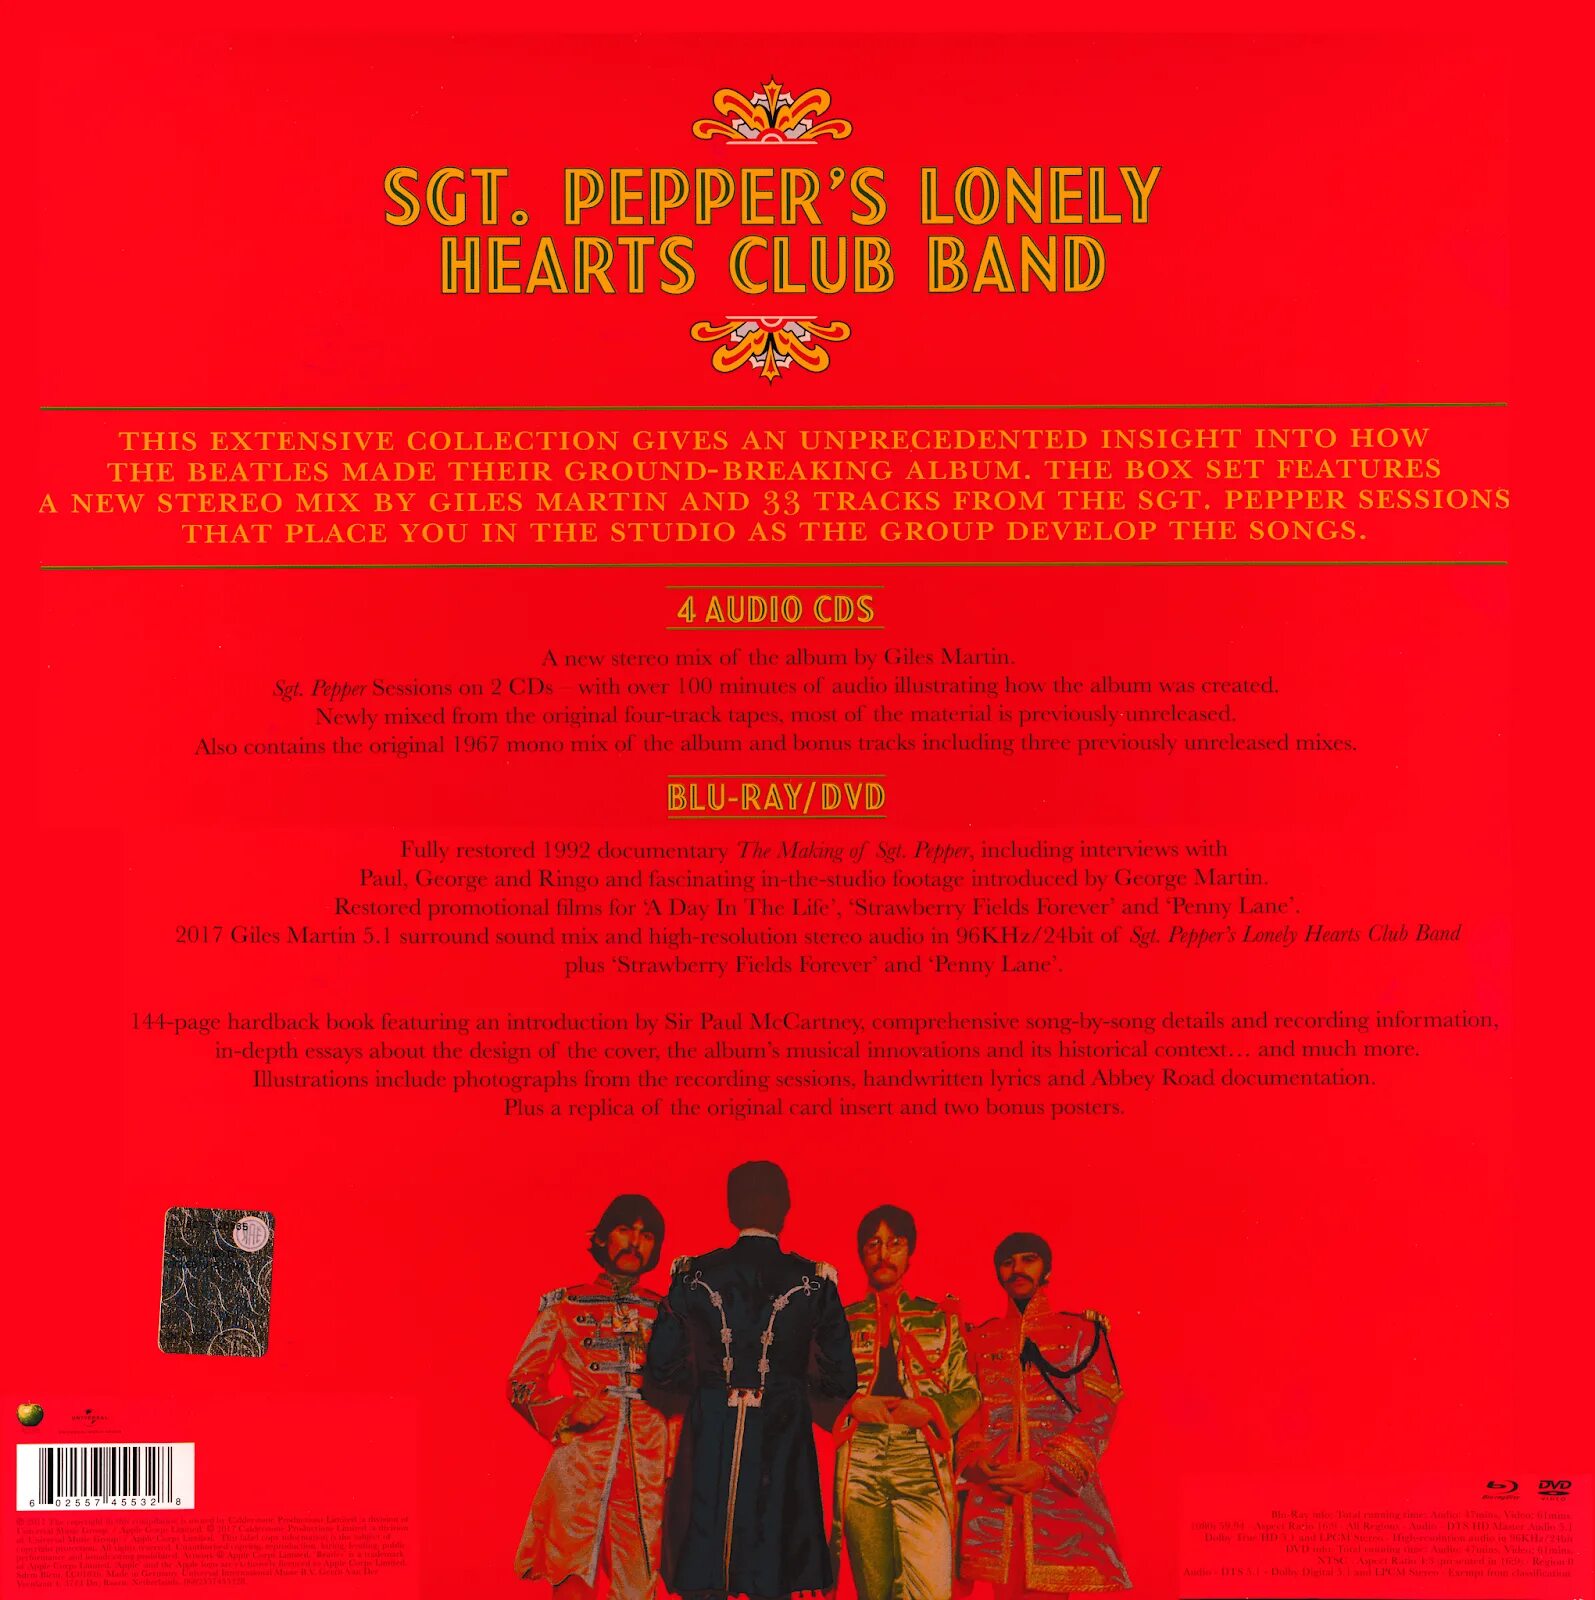 Beatles sgt pepper lonely. Sgt. Pepper’s Lonely Hearts Club Band the Beatles. Sgt Pepper's Lonely Hearts Club Band. The Beatles Sgt. Pepper's Lonely Hearts Club Band 2017. The Beatles Sgt Pepper оркестр 1967.